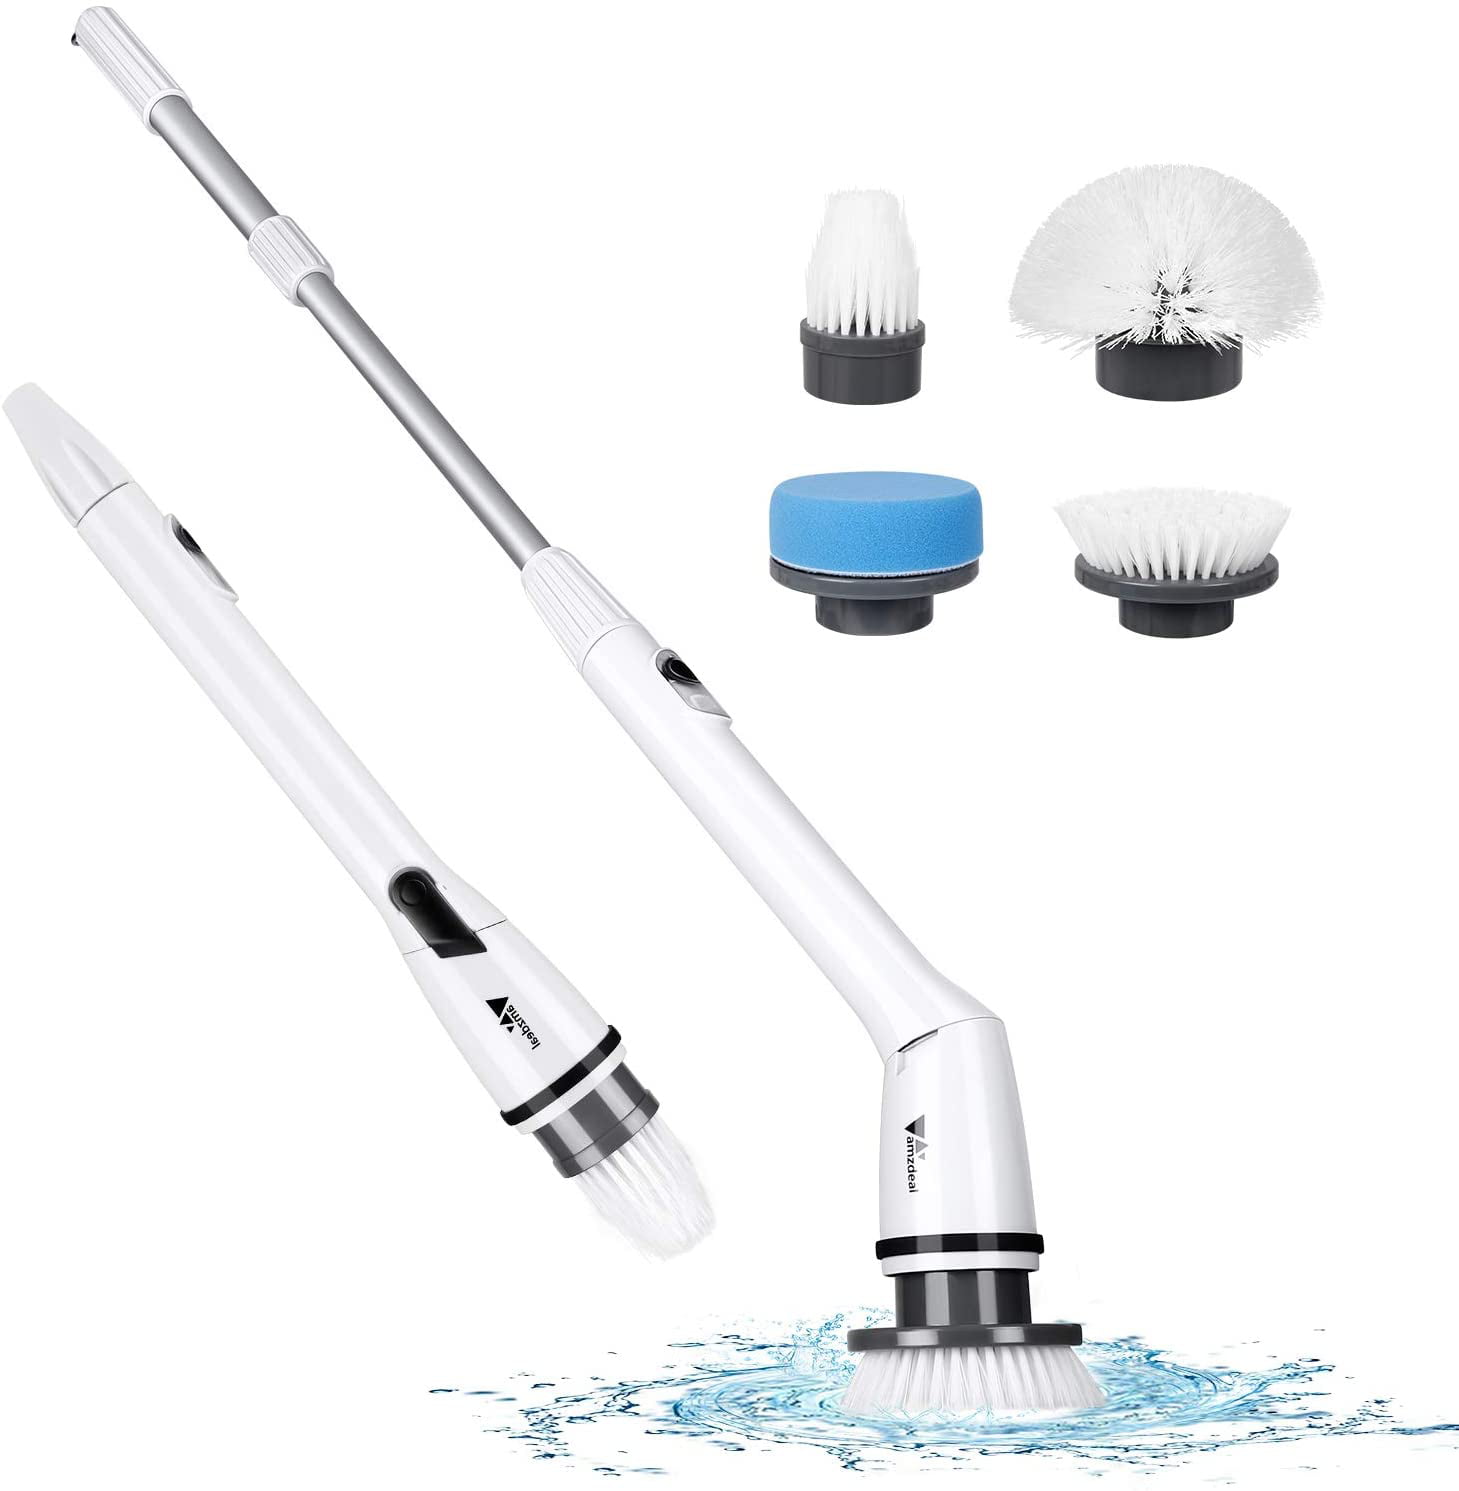 Replacement Brushes Replacement Head for Spin Scrubber mop Set of 3 Flat, Dome 